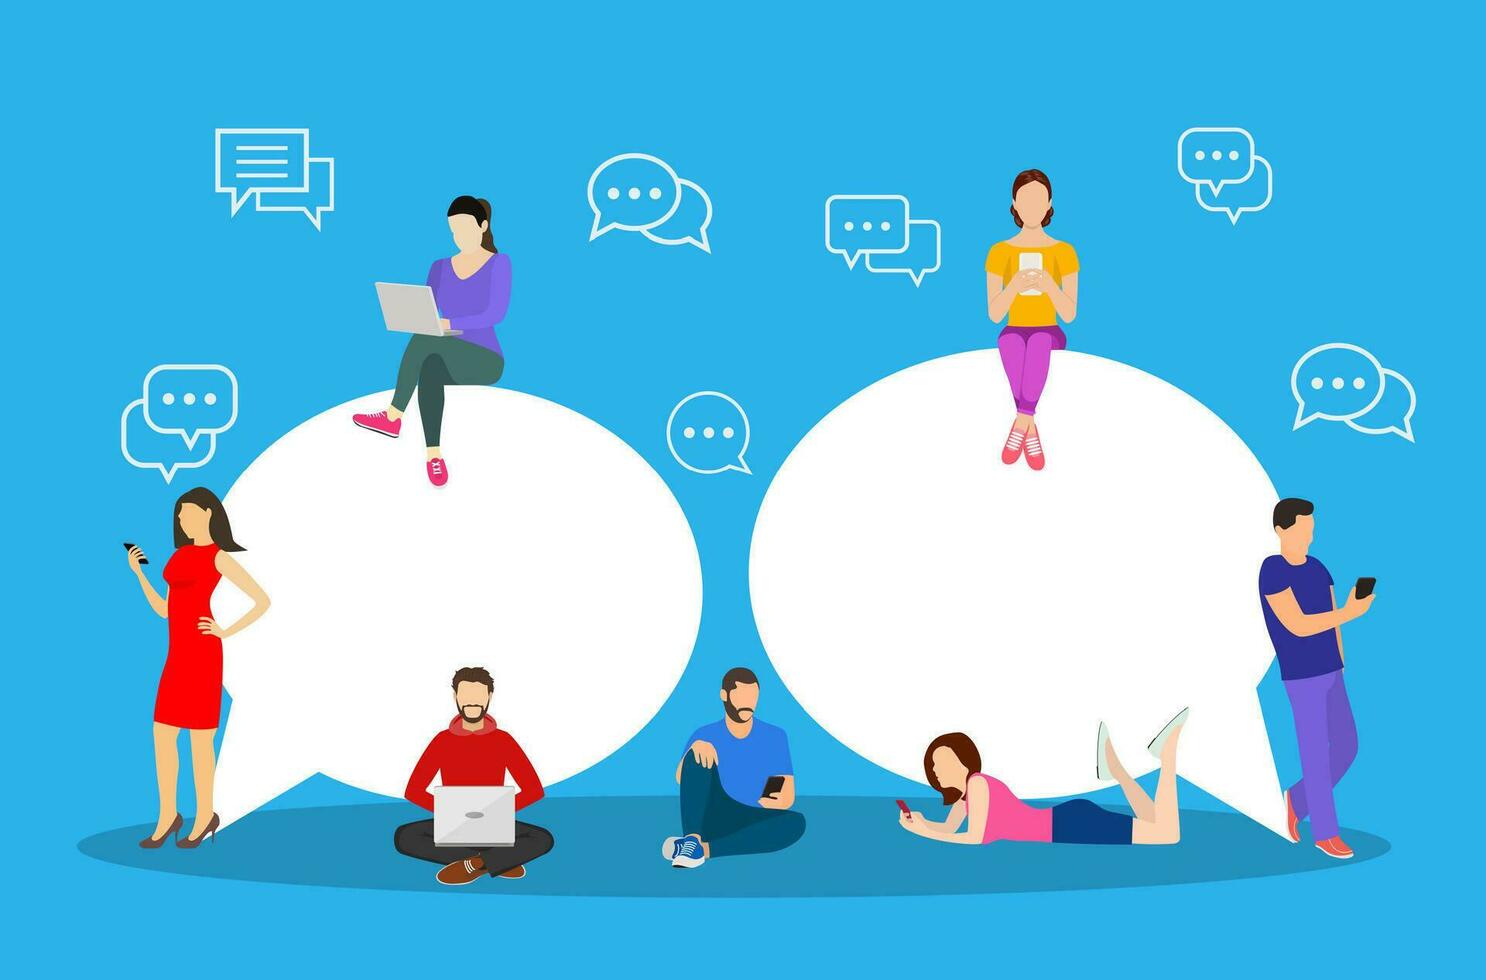 Chat talk. people for sending messages., Speech bubbles, happy people use mobile smartphonefor chatting in social media. Vector illustration in flat style